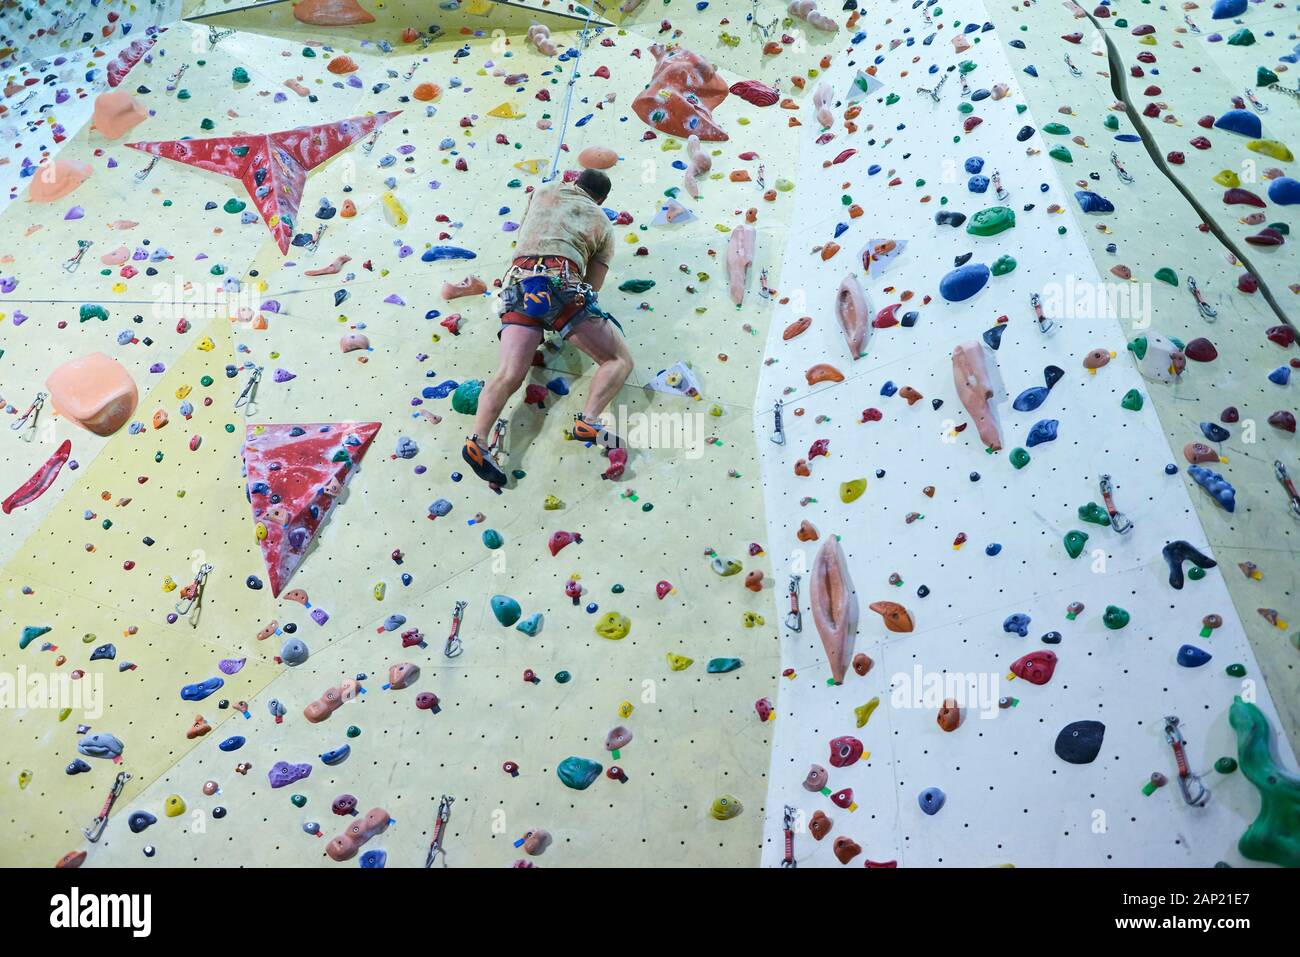 Man climbing wall in bouldering gym. Detail on legs and equipment Stock Photo